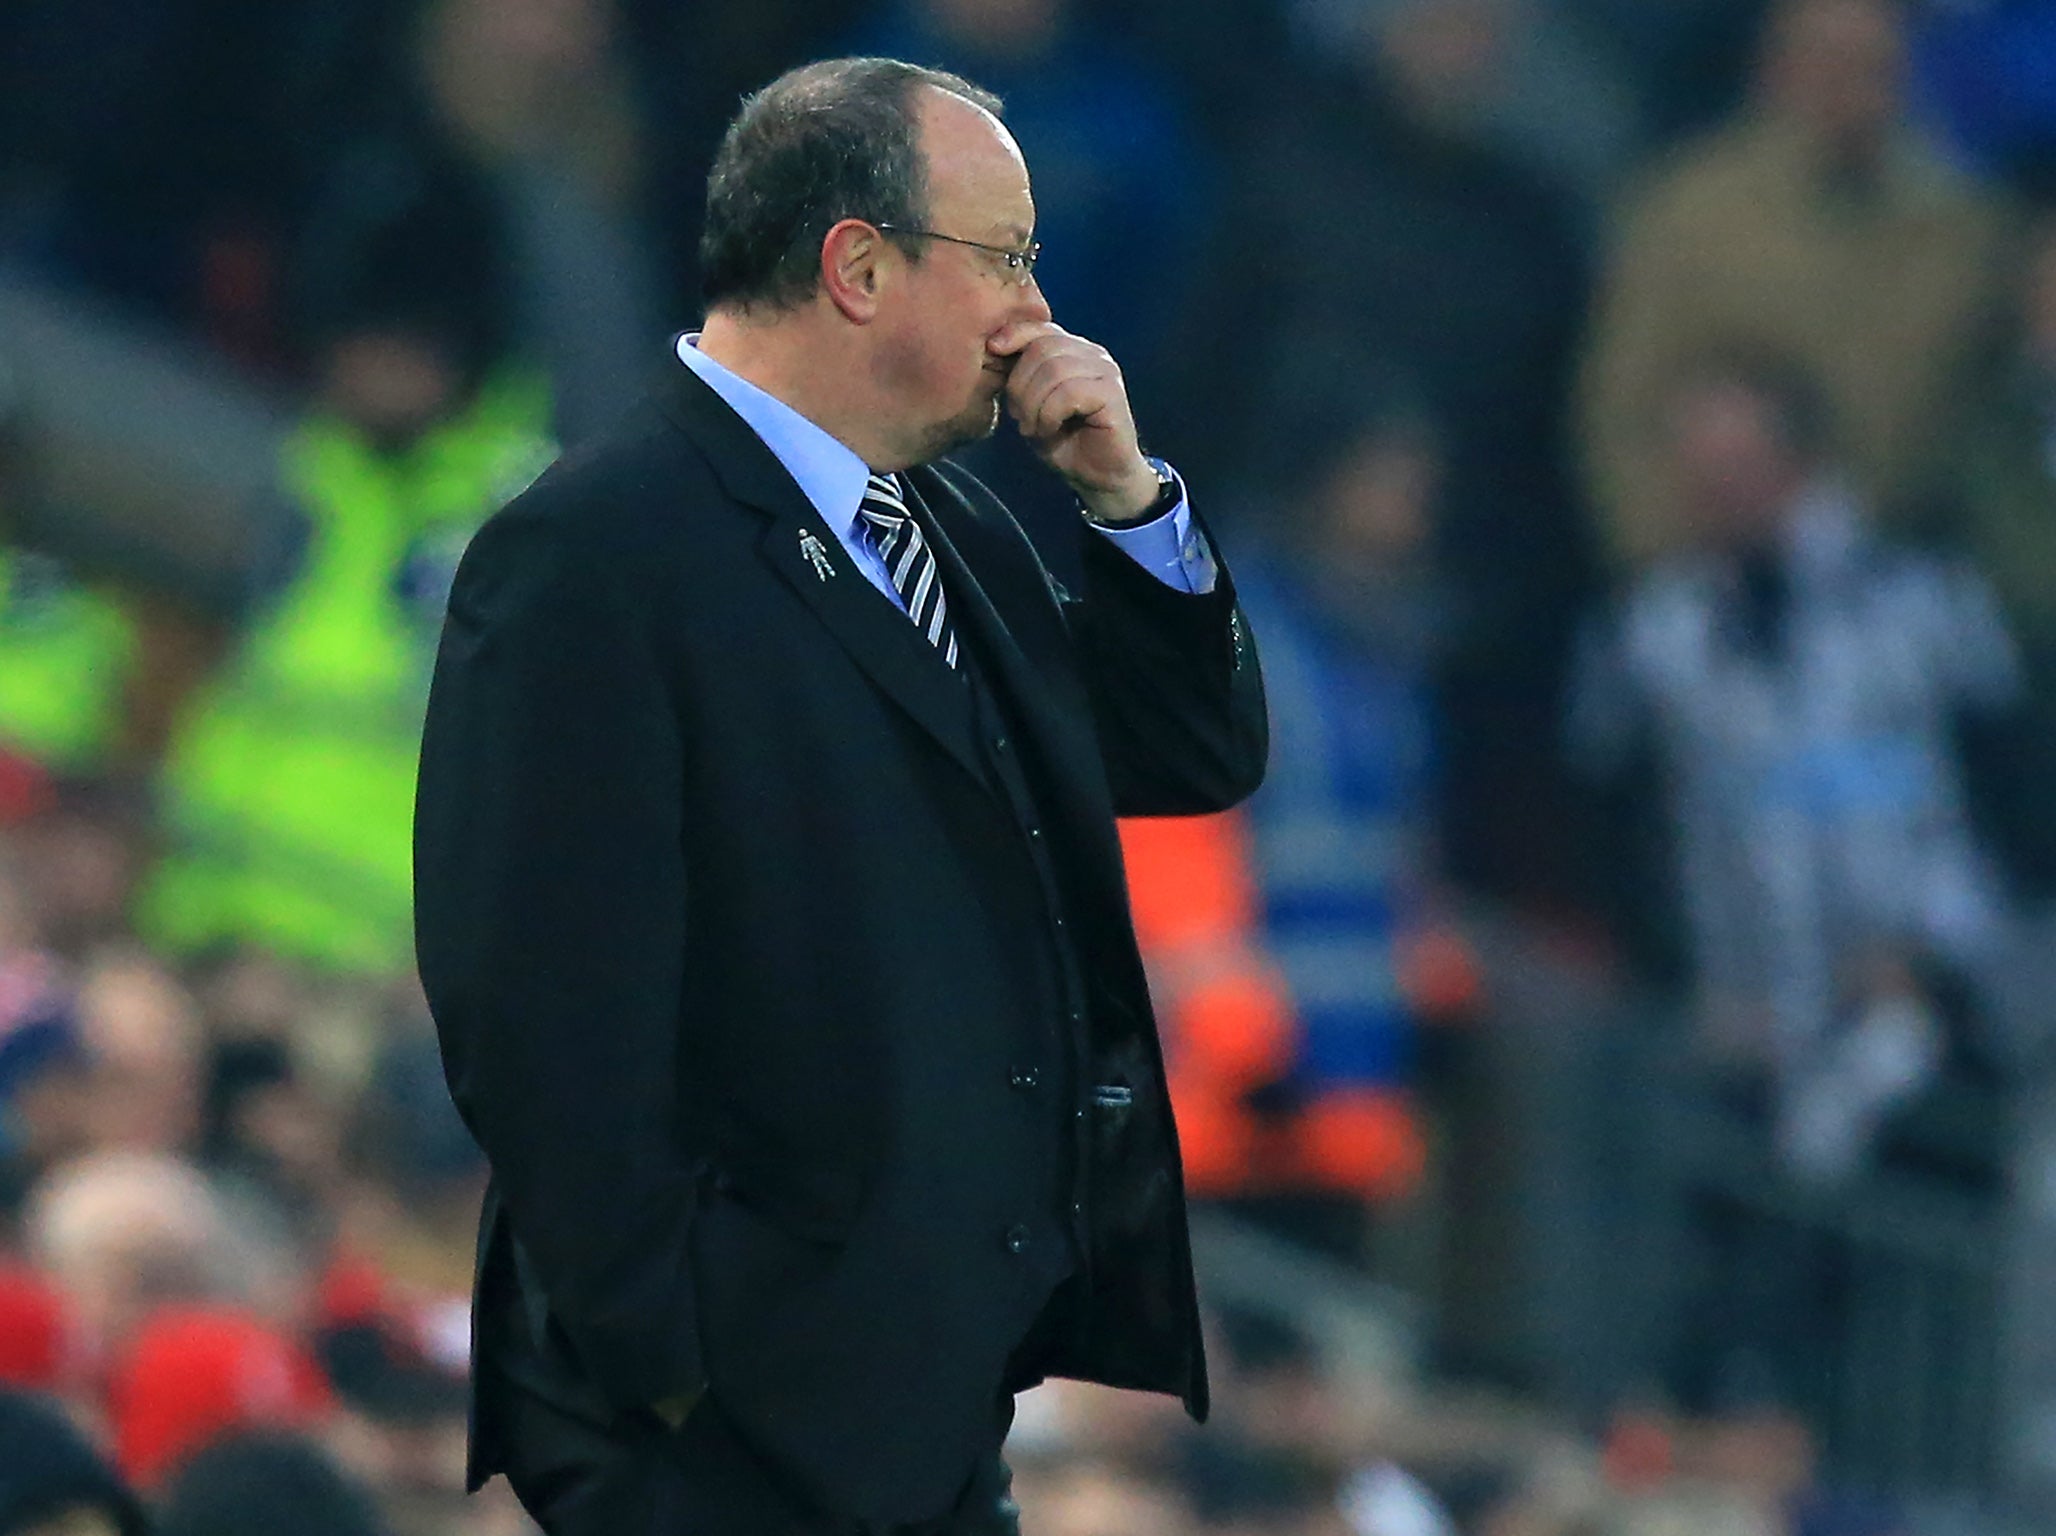 Rafa Benitez says &apos;every game is a cup final&apos; as pressure ramps up on Newcastle&apos;s relegation battle